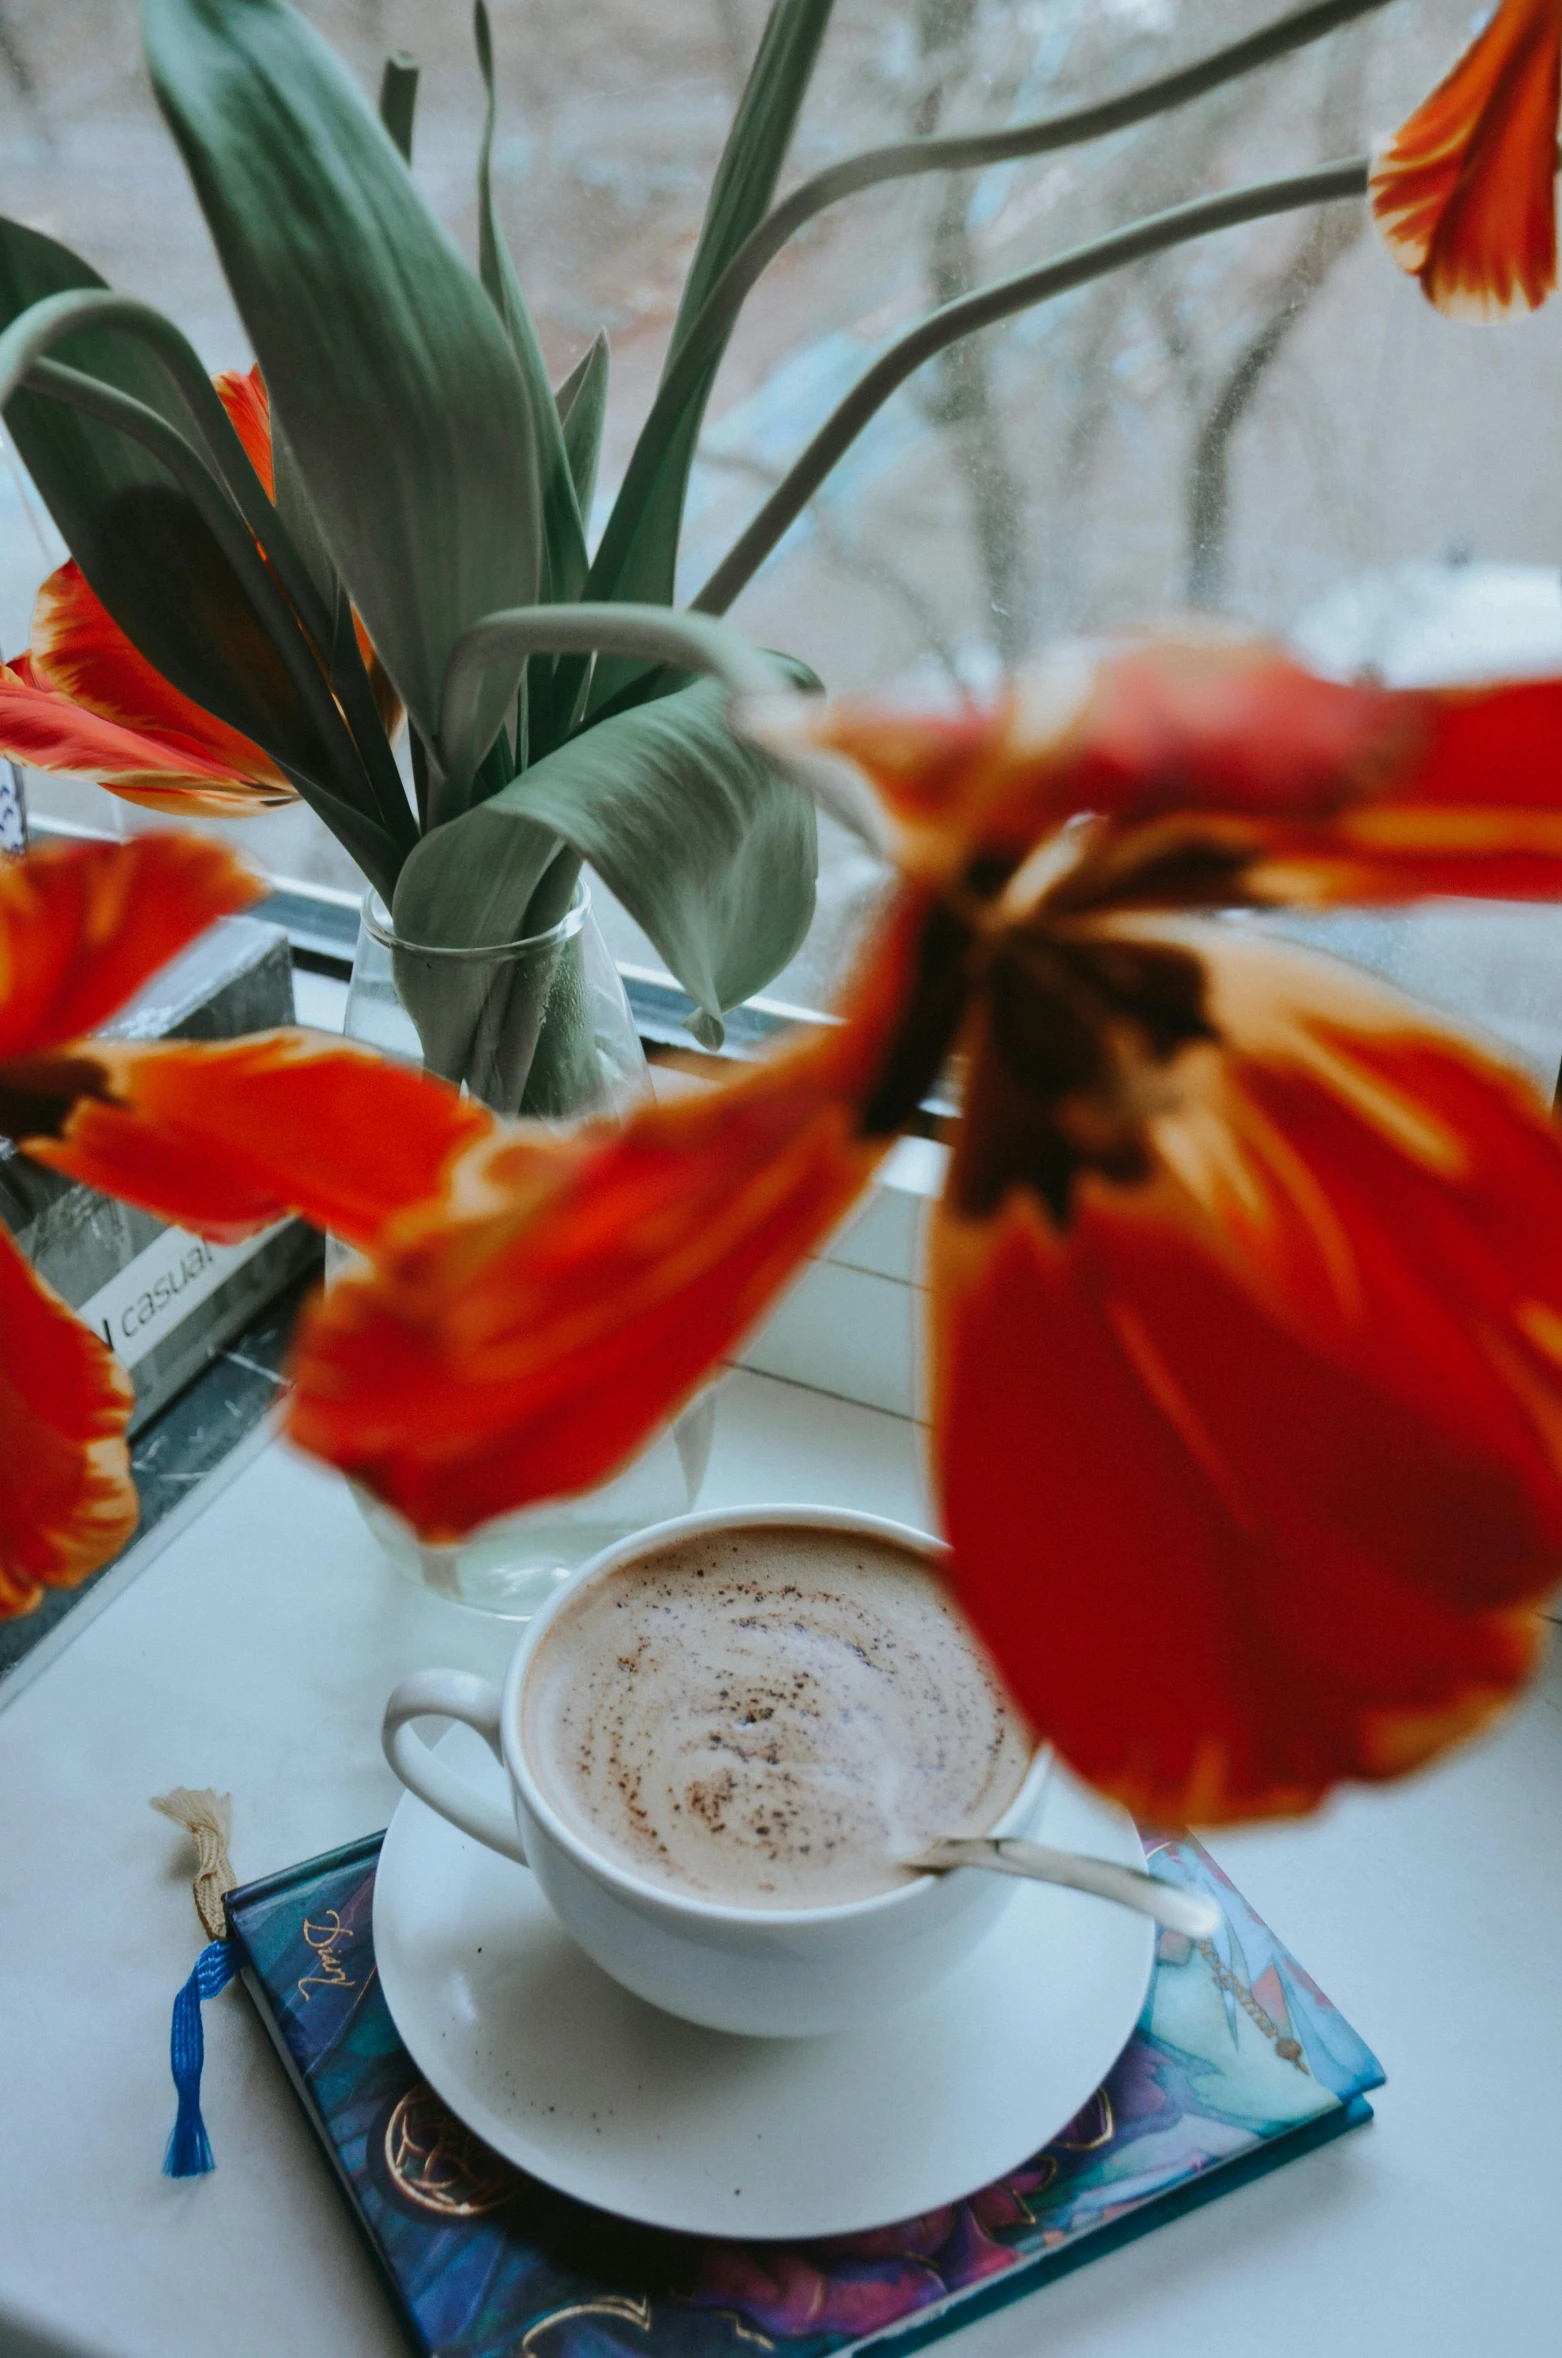 an image of a cup of coffee with flowers